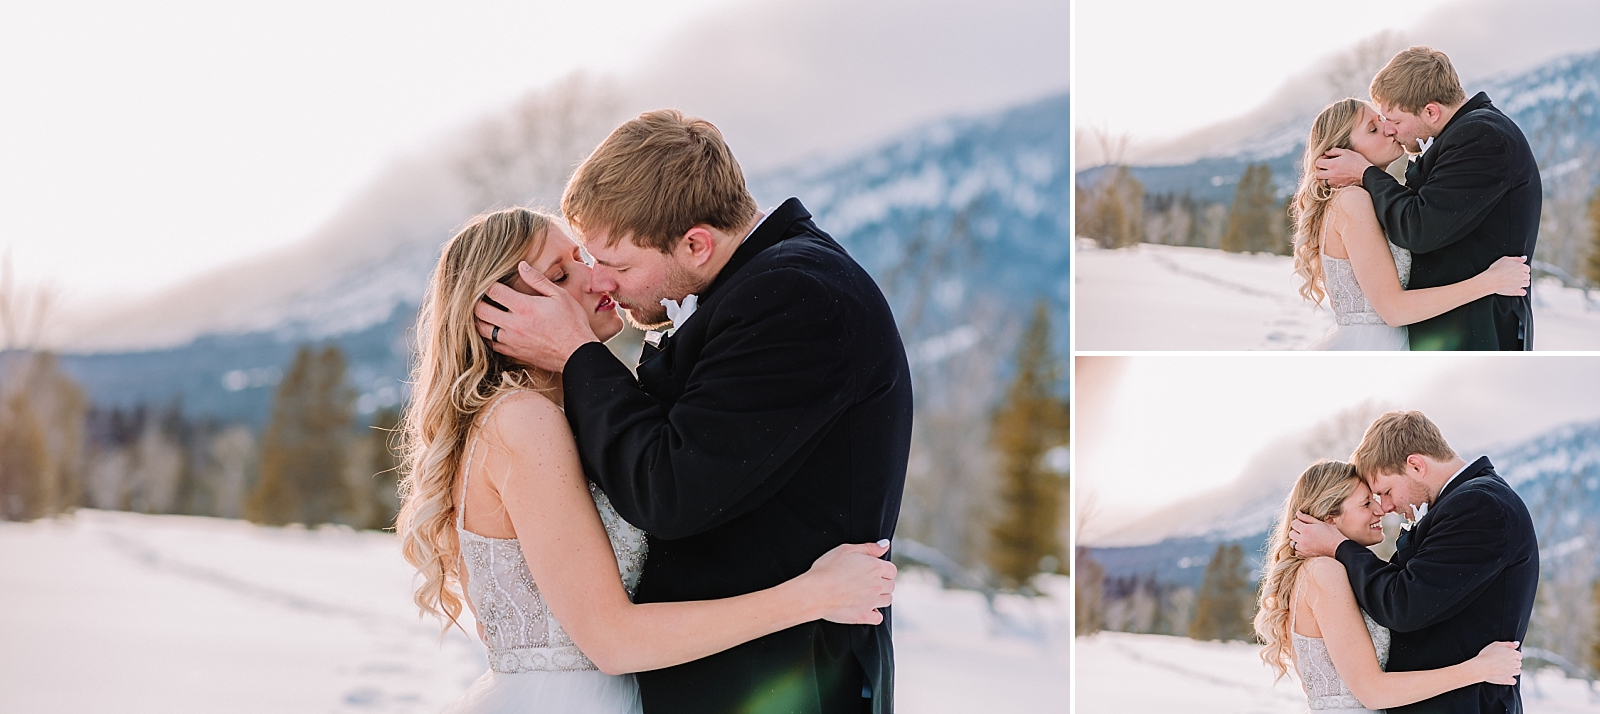 elopement-in-the-tetons-grand-teton-national-park-couple-under-the-mountains-snow-winter-bride-and-groom-jackson-hole-wyoming-romantic-classy-elegant-timeless